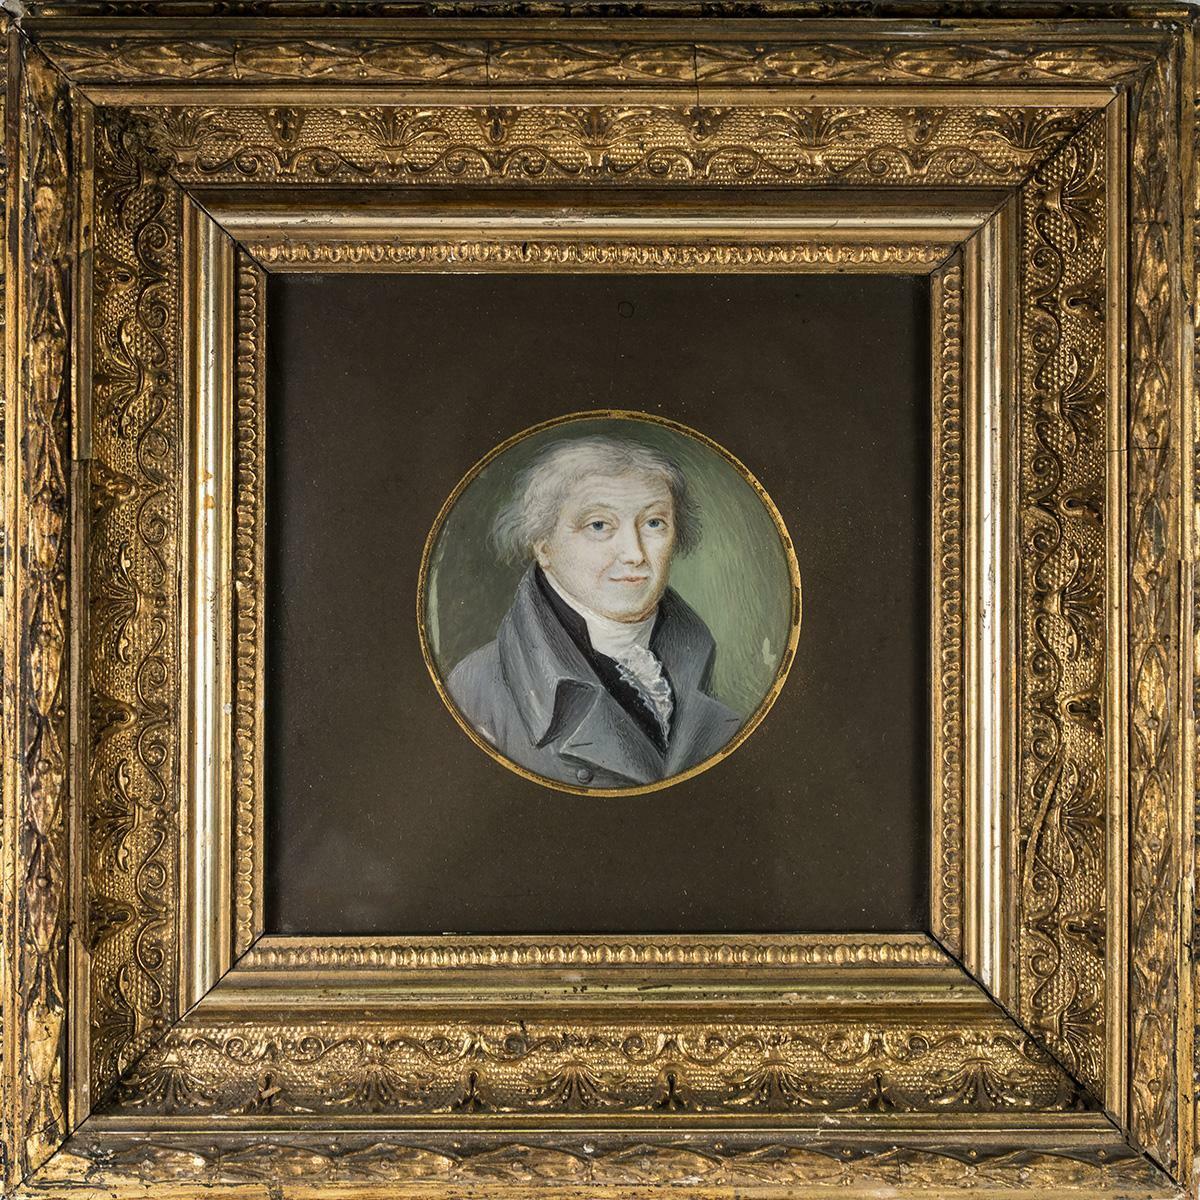 Exceptional Antique French Portrait Miniature in Fine Wood Frame, c.1800-1820